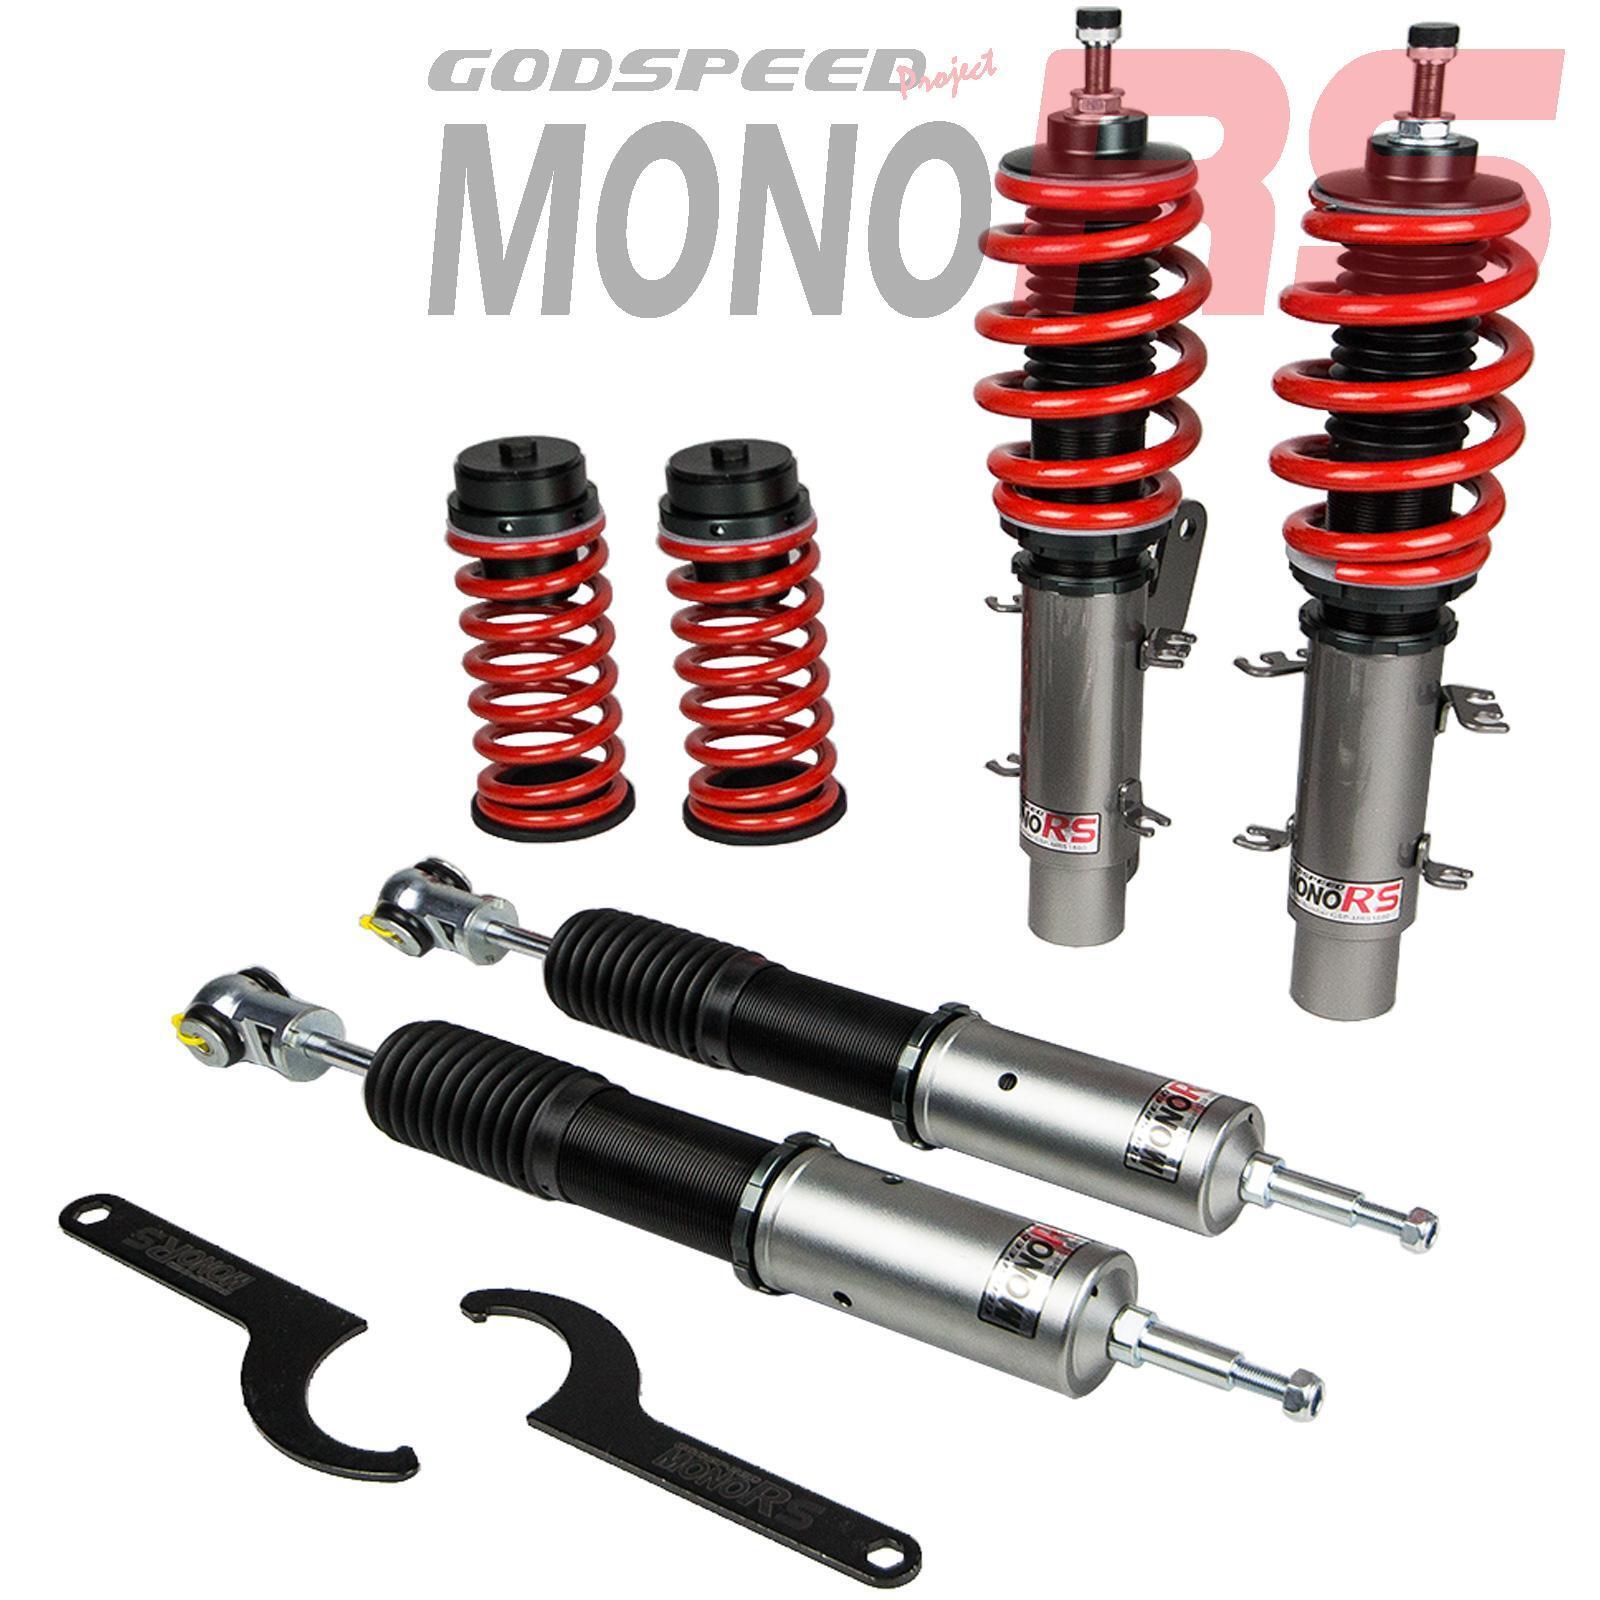 Godspeed MonoRS Coilovers Lowering Kit for VW JETTA MK4 99-05 Adjustable